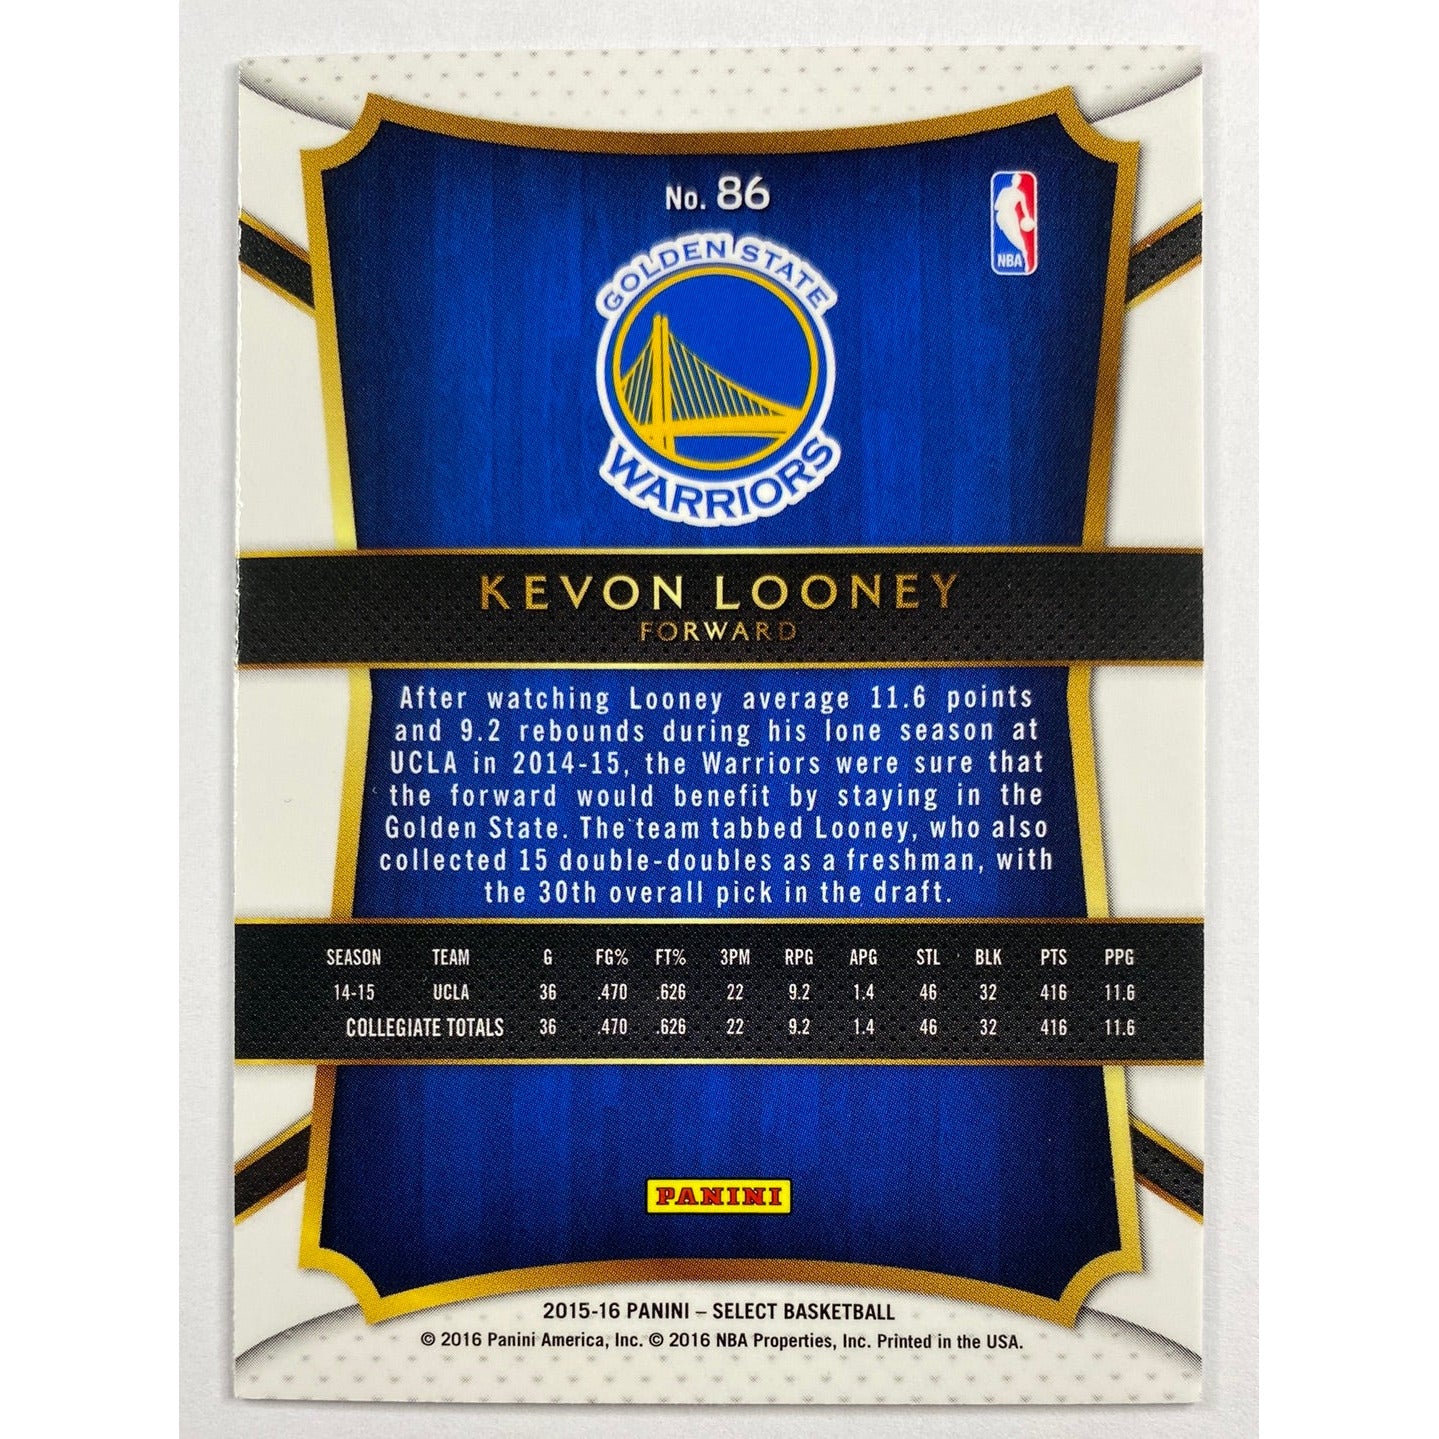 2015-16 Select Kevon Looney RC